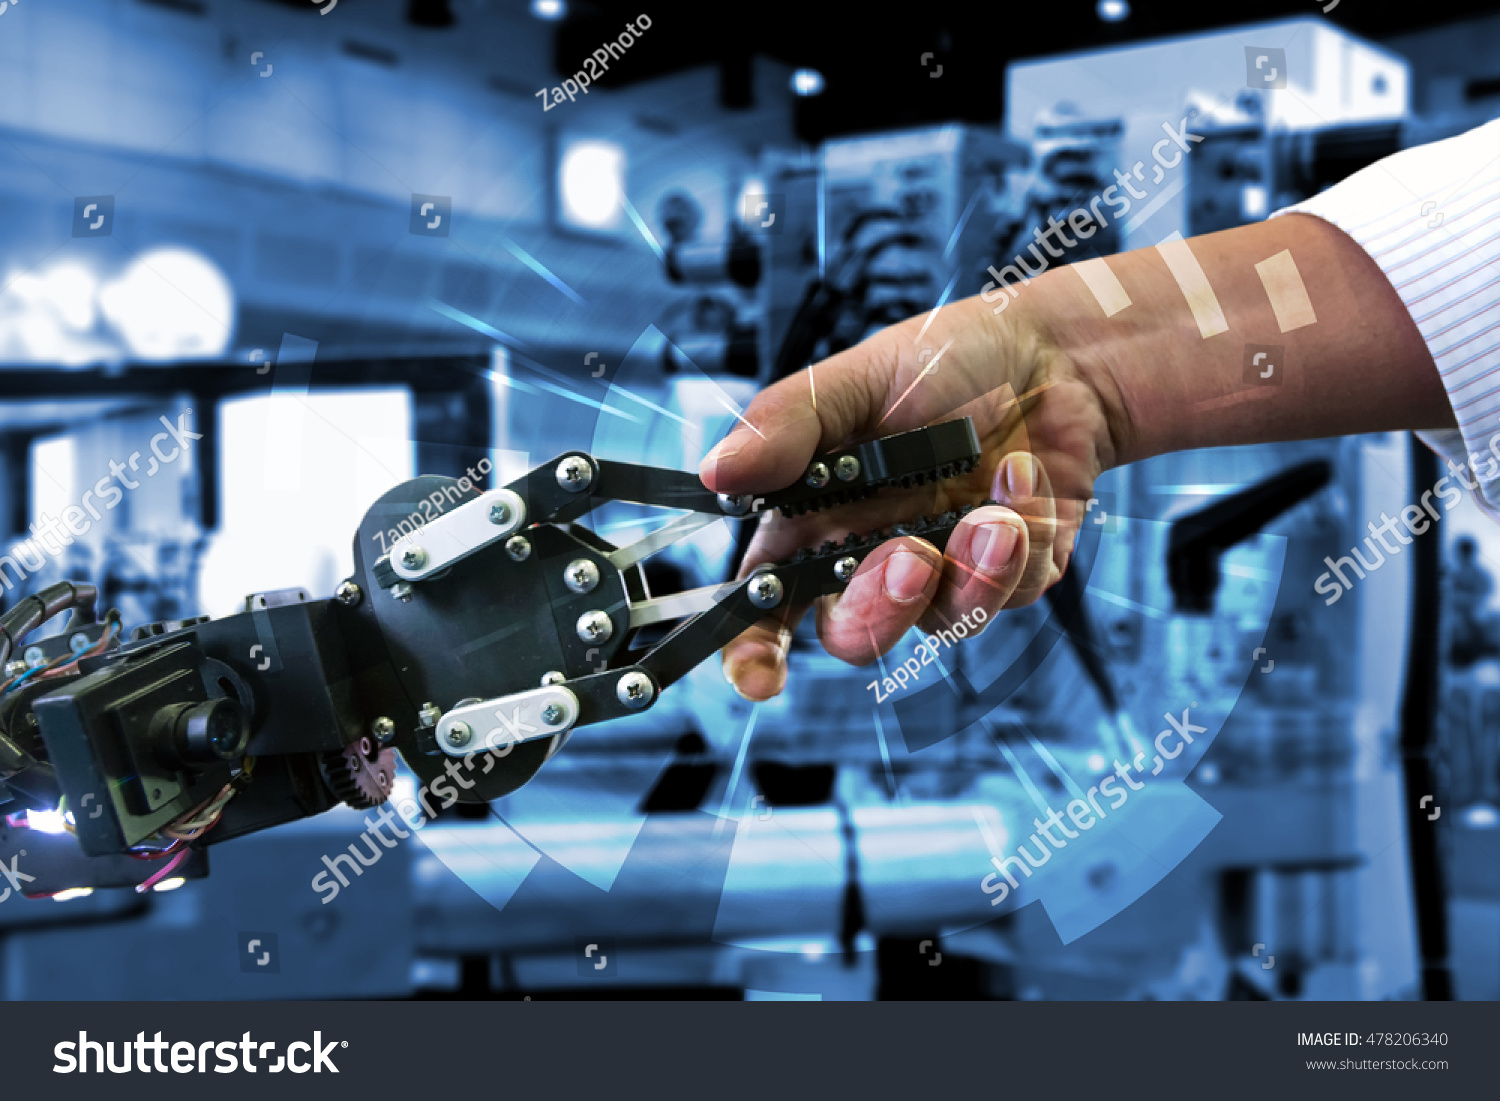 Cyber communication and robotic concepts. Industrial 4.0 Cyber Physical Systems concept. Robot and Engineerer human holding hand with handshake and graphic for background #478206340